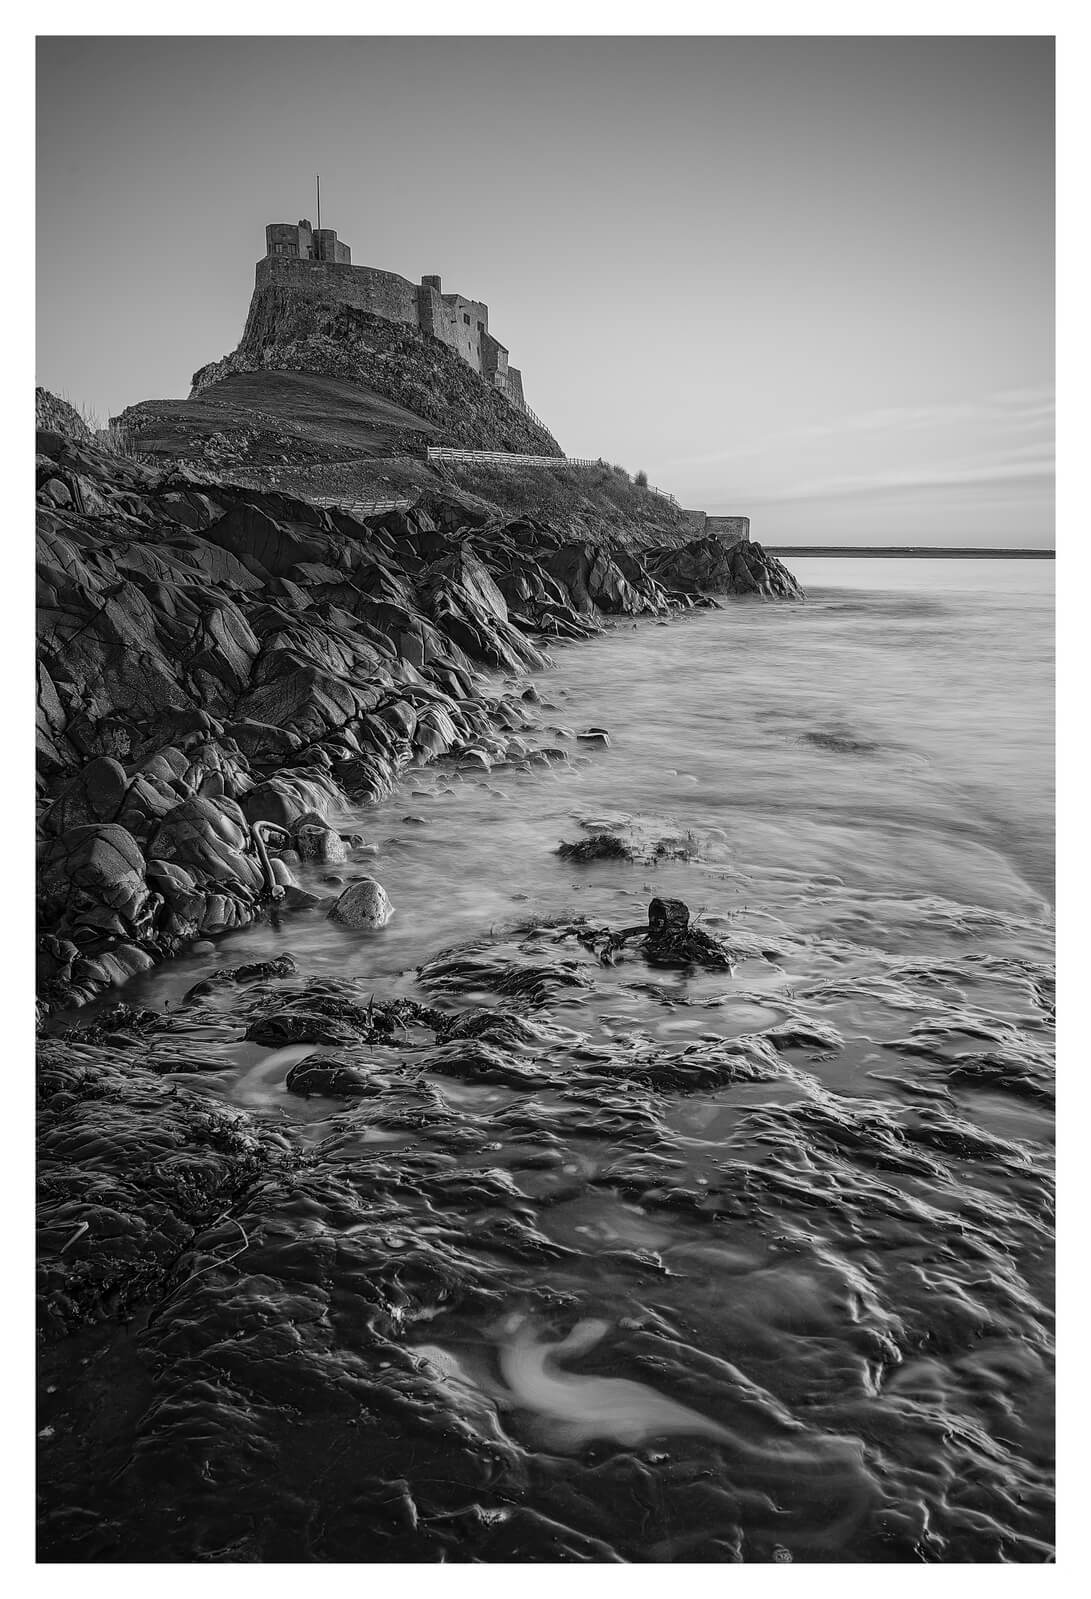 Image of Holy Island harbour by Bob Davies